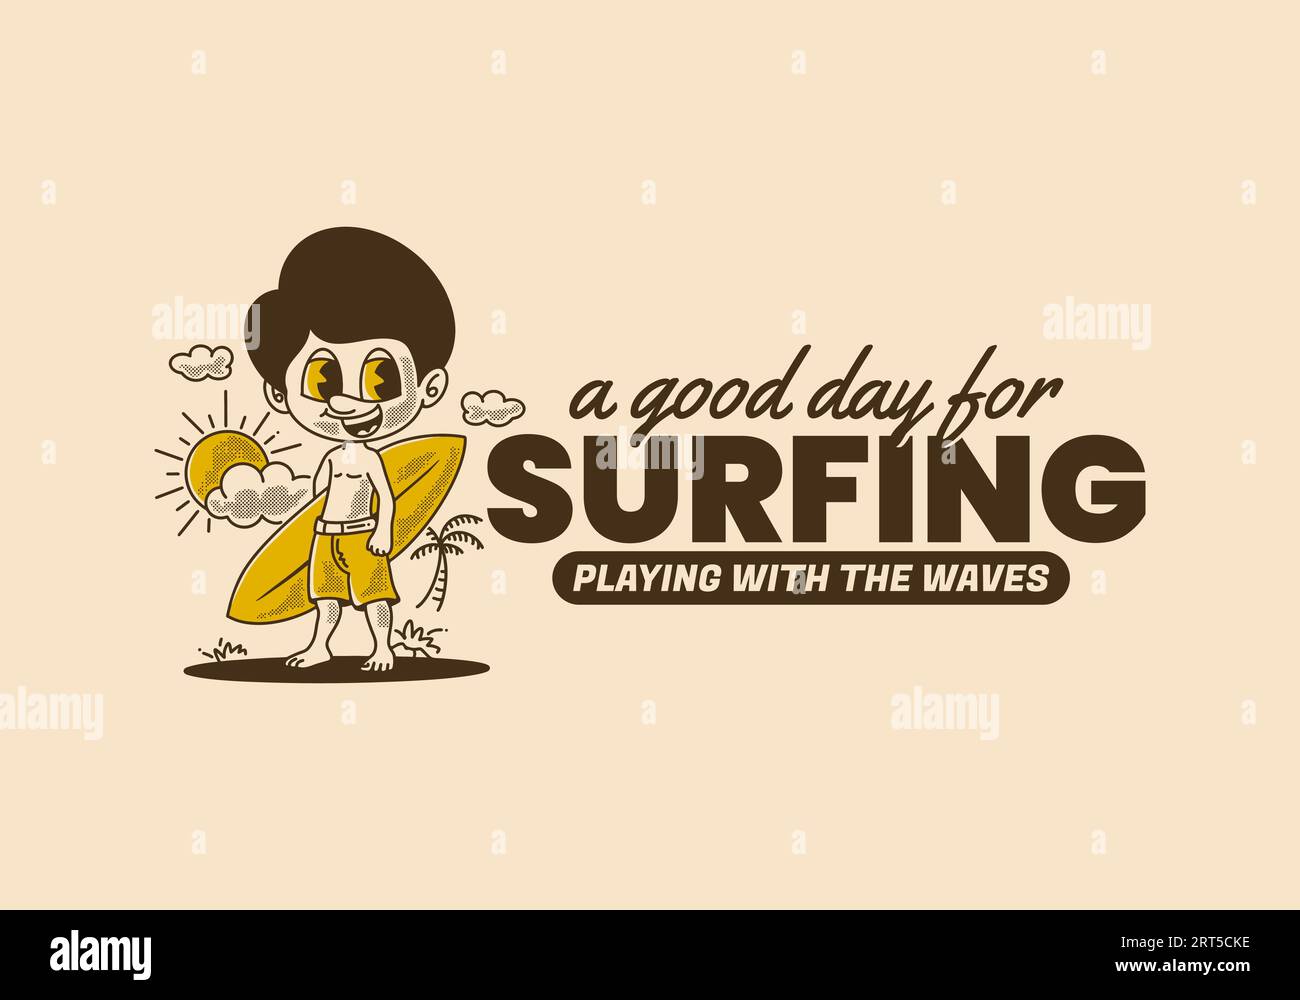 A good day for surfing, vintage illustration of a boy standing on the beach holding a surfboard Stock Vector